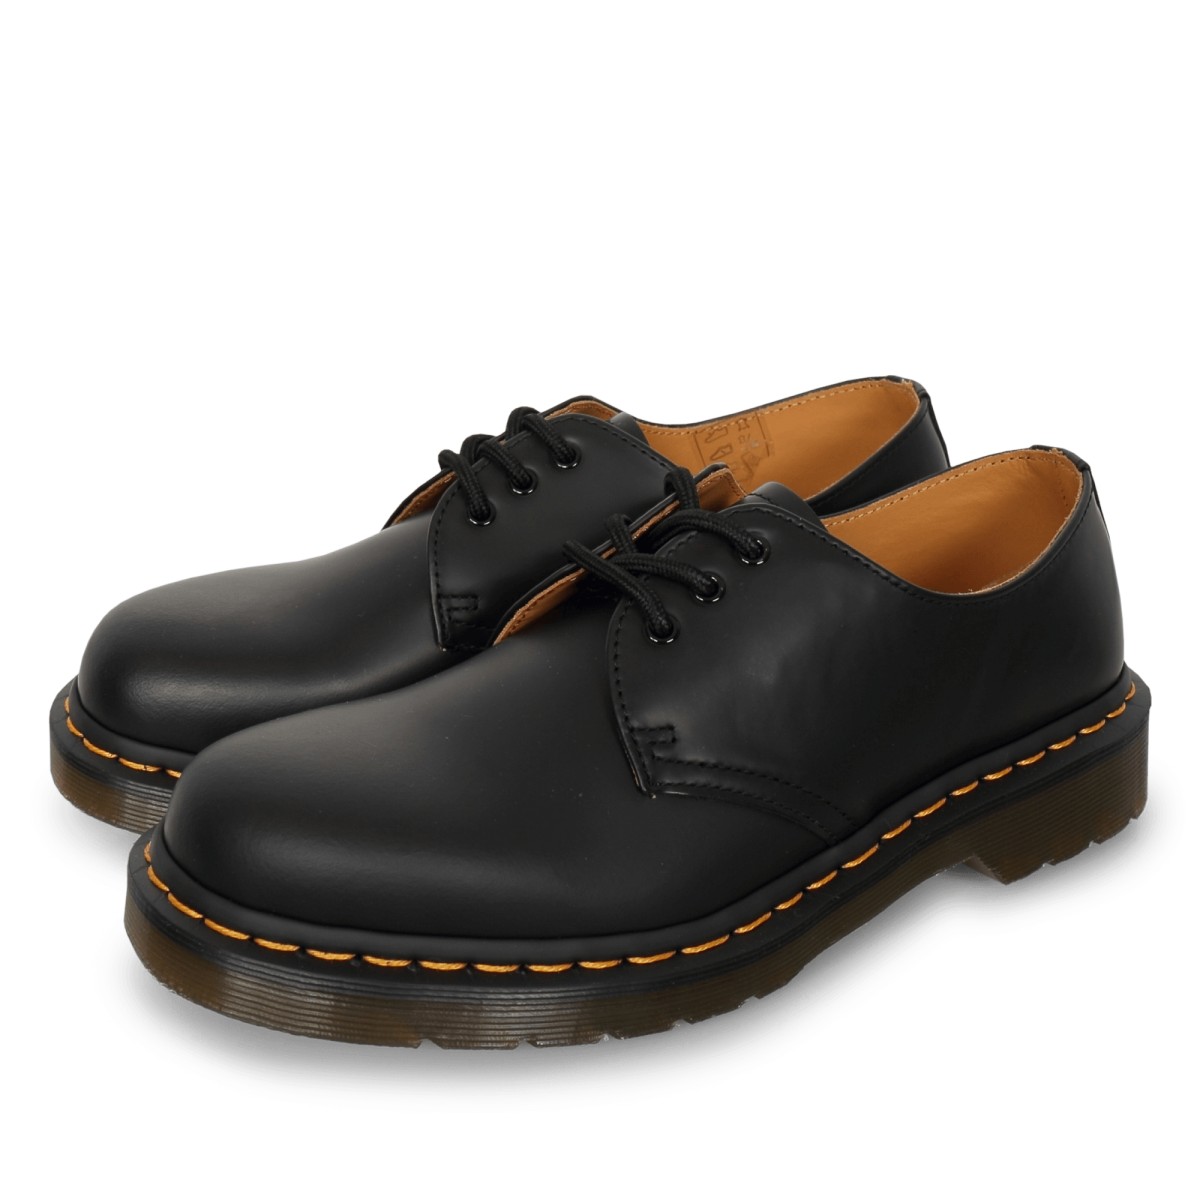 Dr.Martens 1461 Smooth Shoes